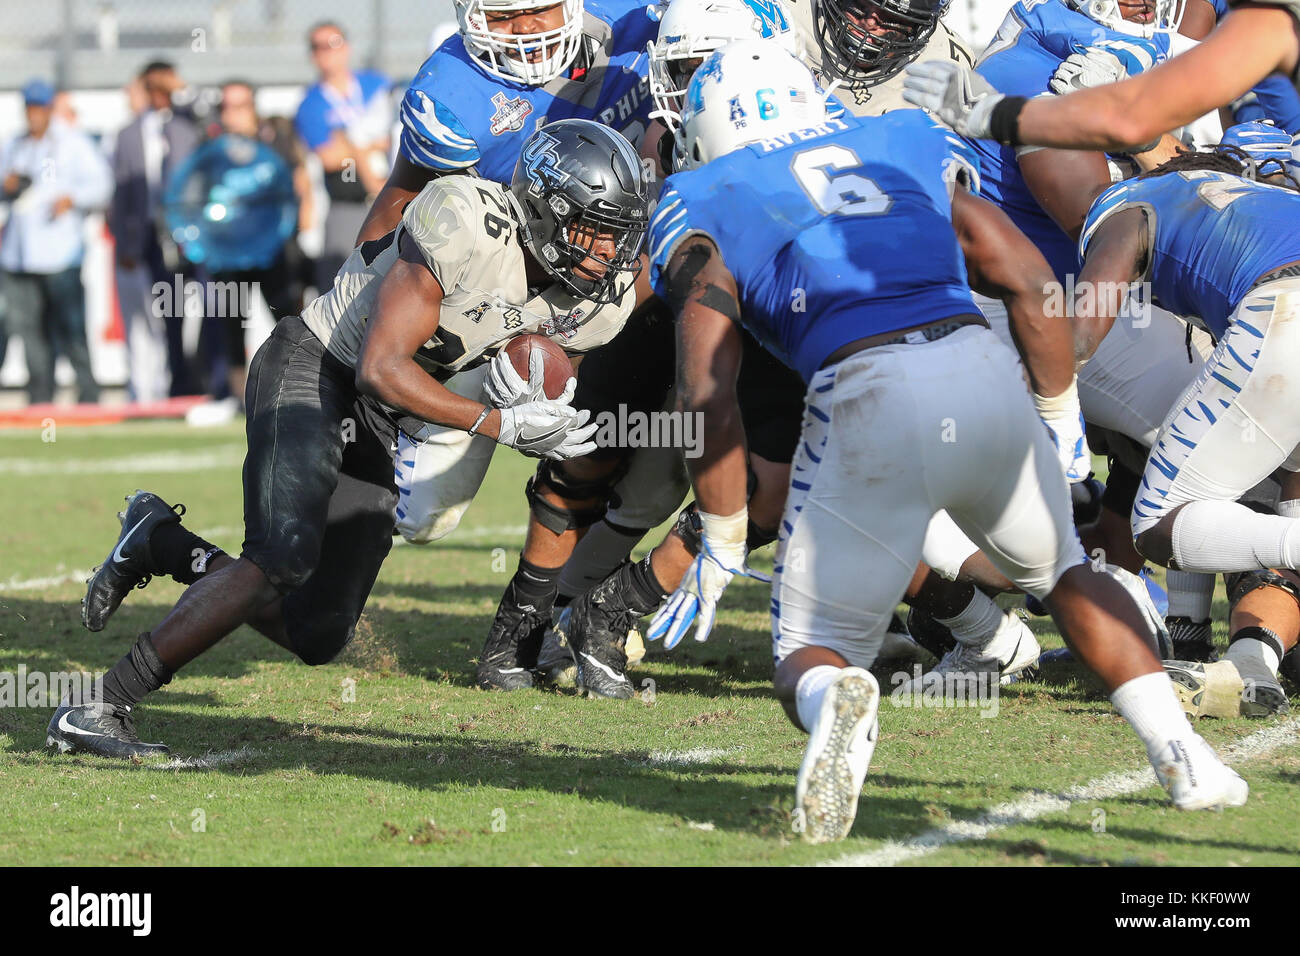 Orlando, FL, USA. 2nd Dec, 2017. UCF's Otis Anderson #26 cuts towards the end zone just before scoring the game winning touchdown during the AAC Championship football game between the UCF Knights and the Memphis Tigers at the Spectrum Stadium in Orlando, FL. Kyle Okita/CSM/Alamy Live News Stock Photo